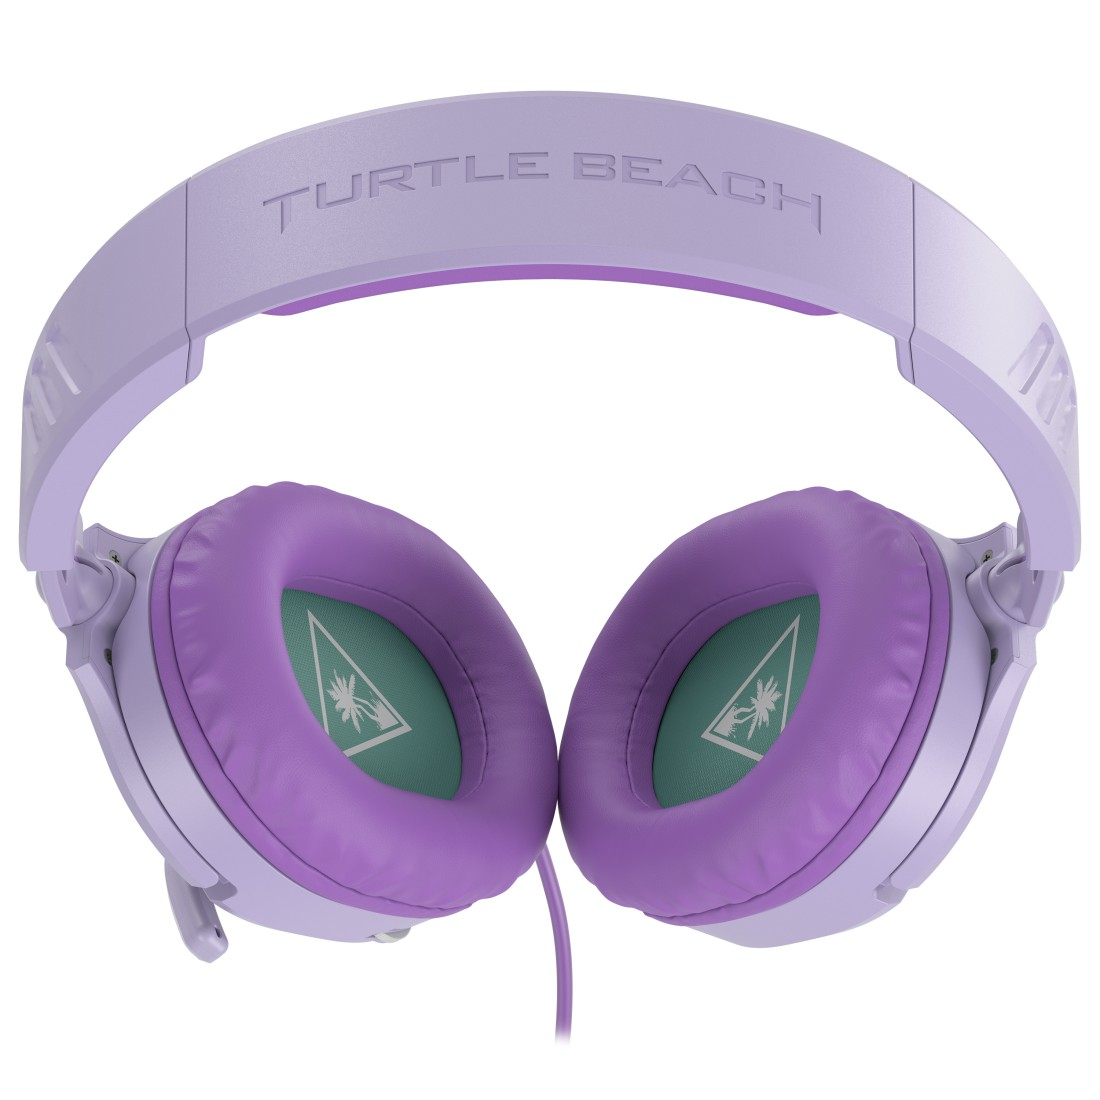 TURTLE BEACH TBS-6560-05 Over-ear Gaming Over-Ear 70, Recon Headset Lila